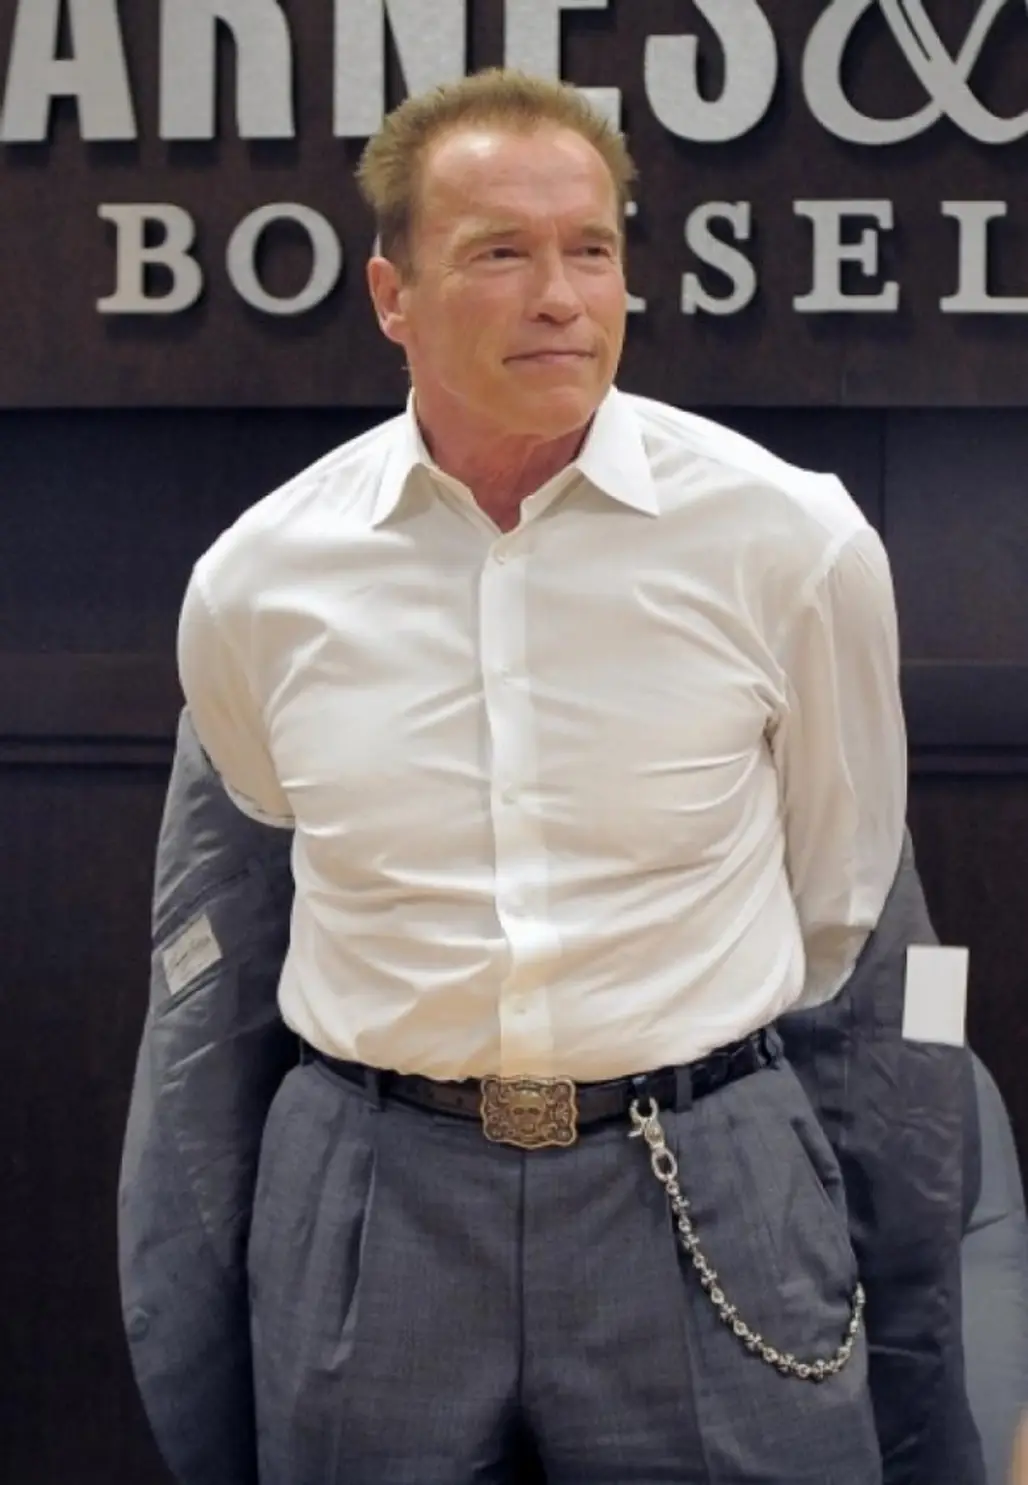 “I Think That Gay Marriage is Something That Should Be between a Man and a Woman.” - Arnold Schwarzenegger